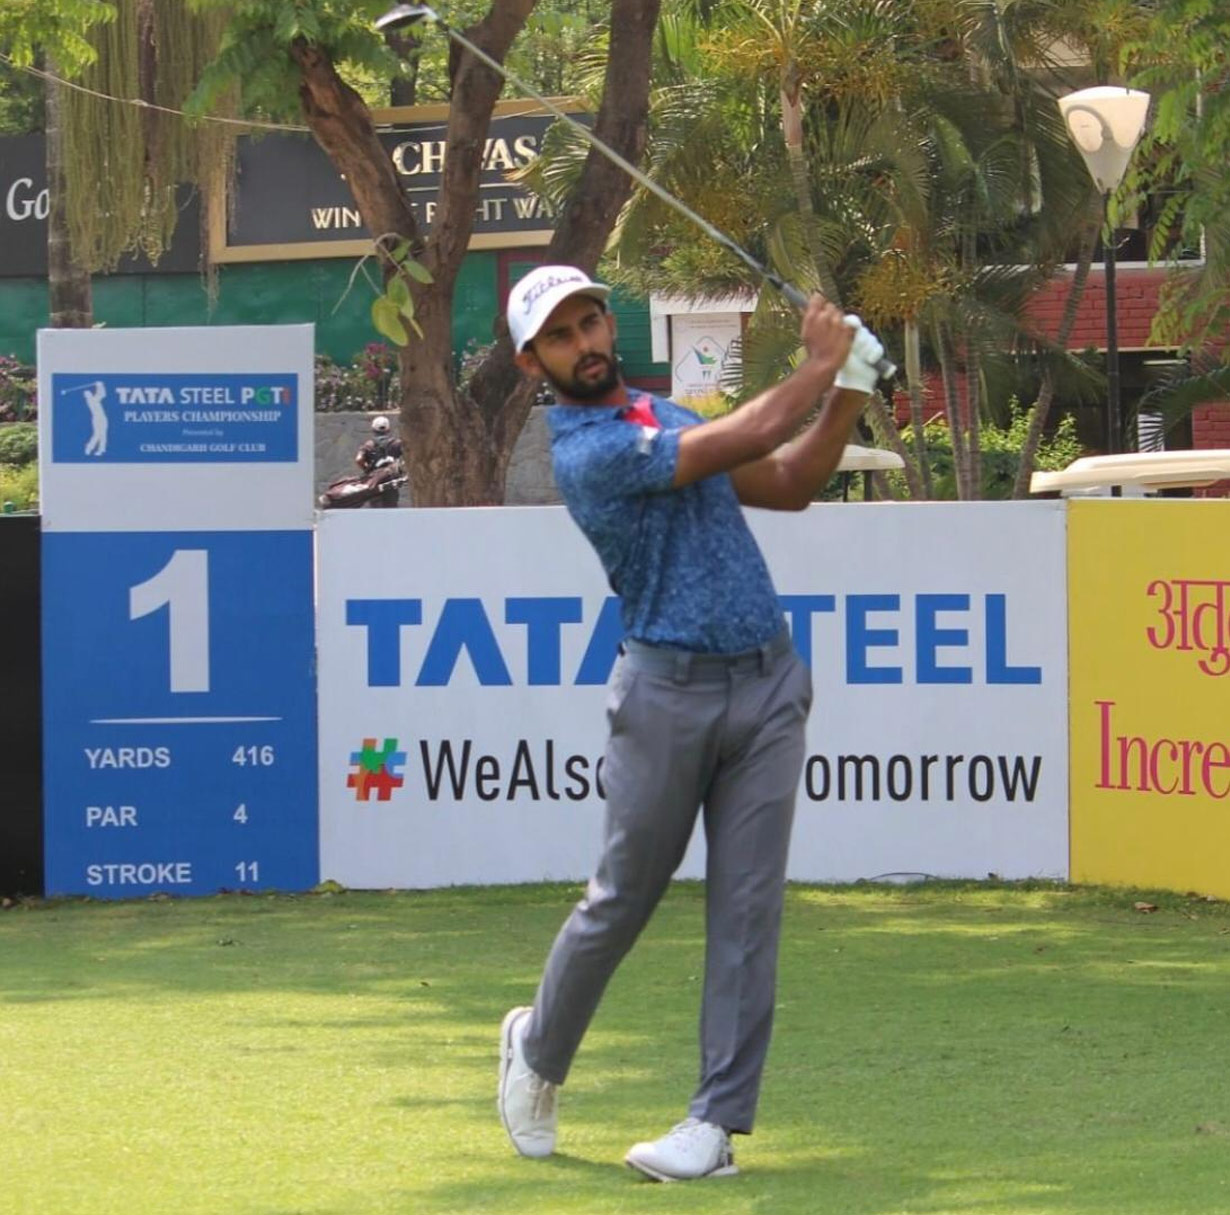 Trishul equalled the course record at Chandigarh today with a 7 under par 65 to lead the event.